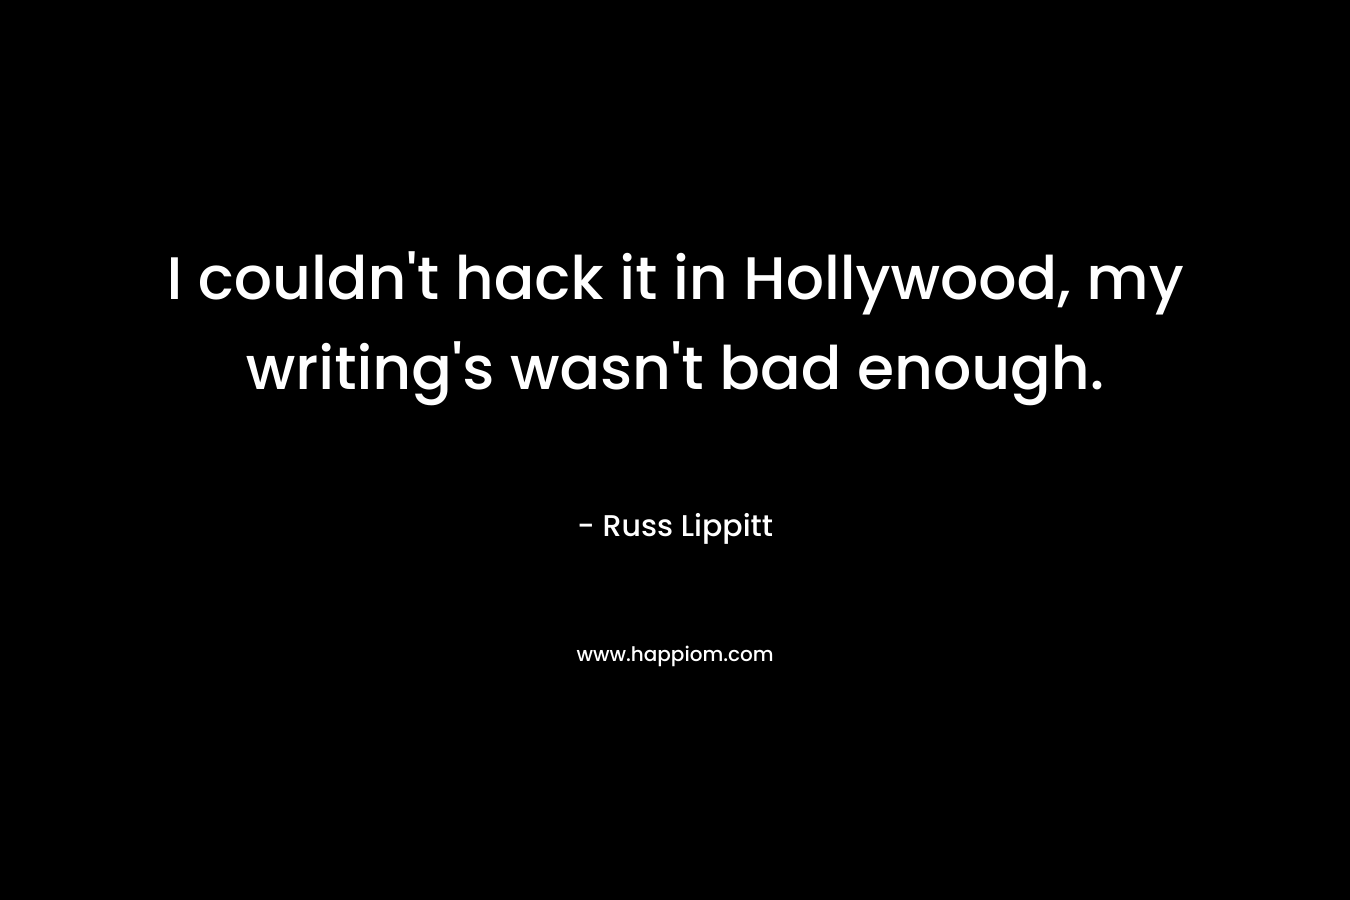 I couldn’t hack it in Hollywood, my writing’s wasn’t bad enough. – Russ Lippitt